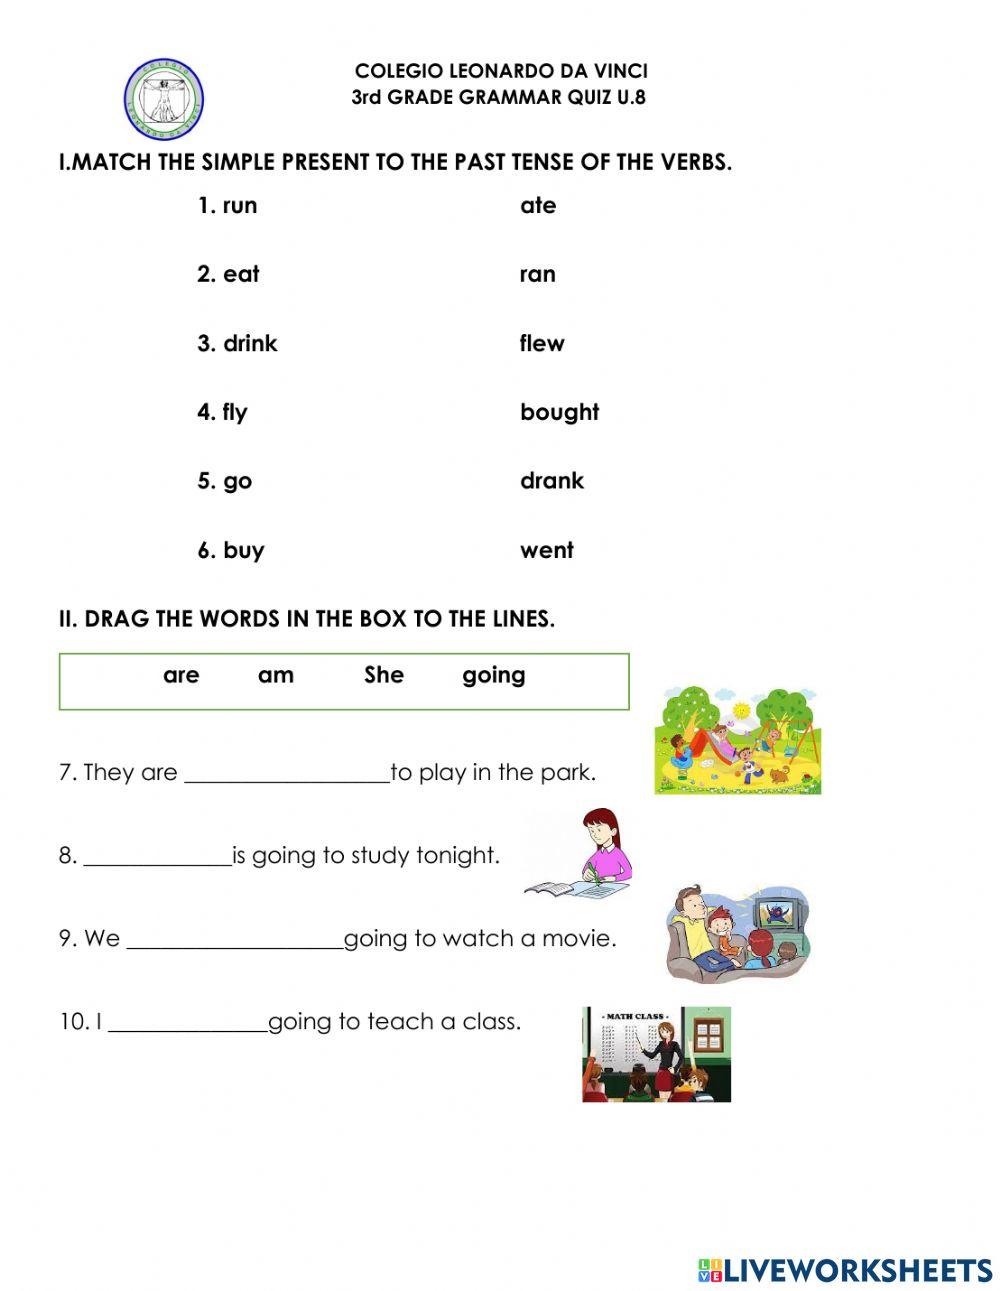 Quiz 3° online exercise for